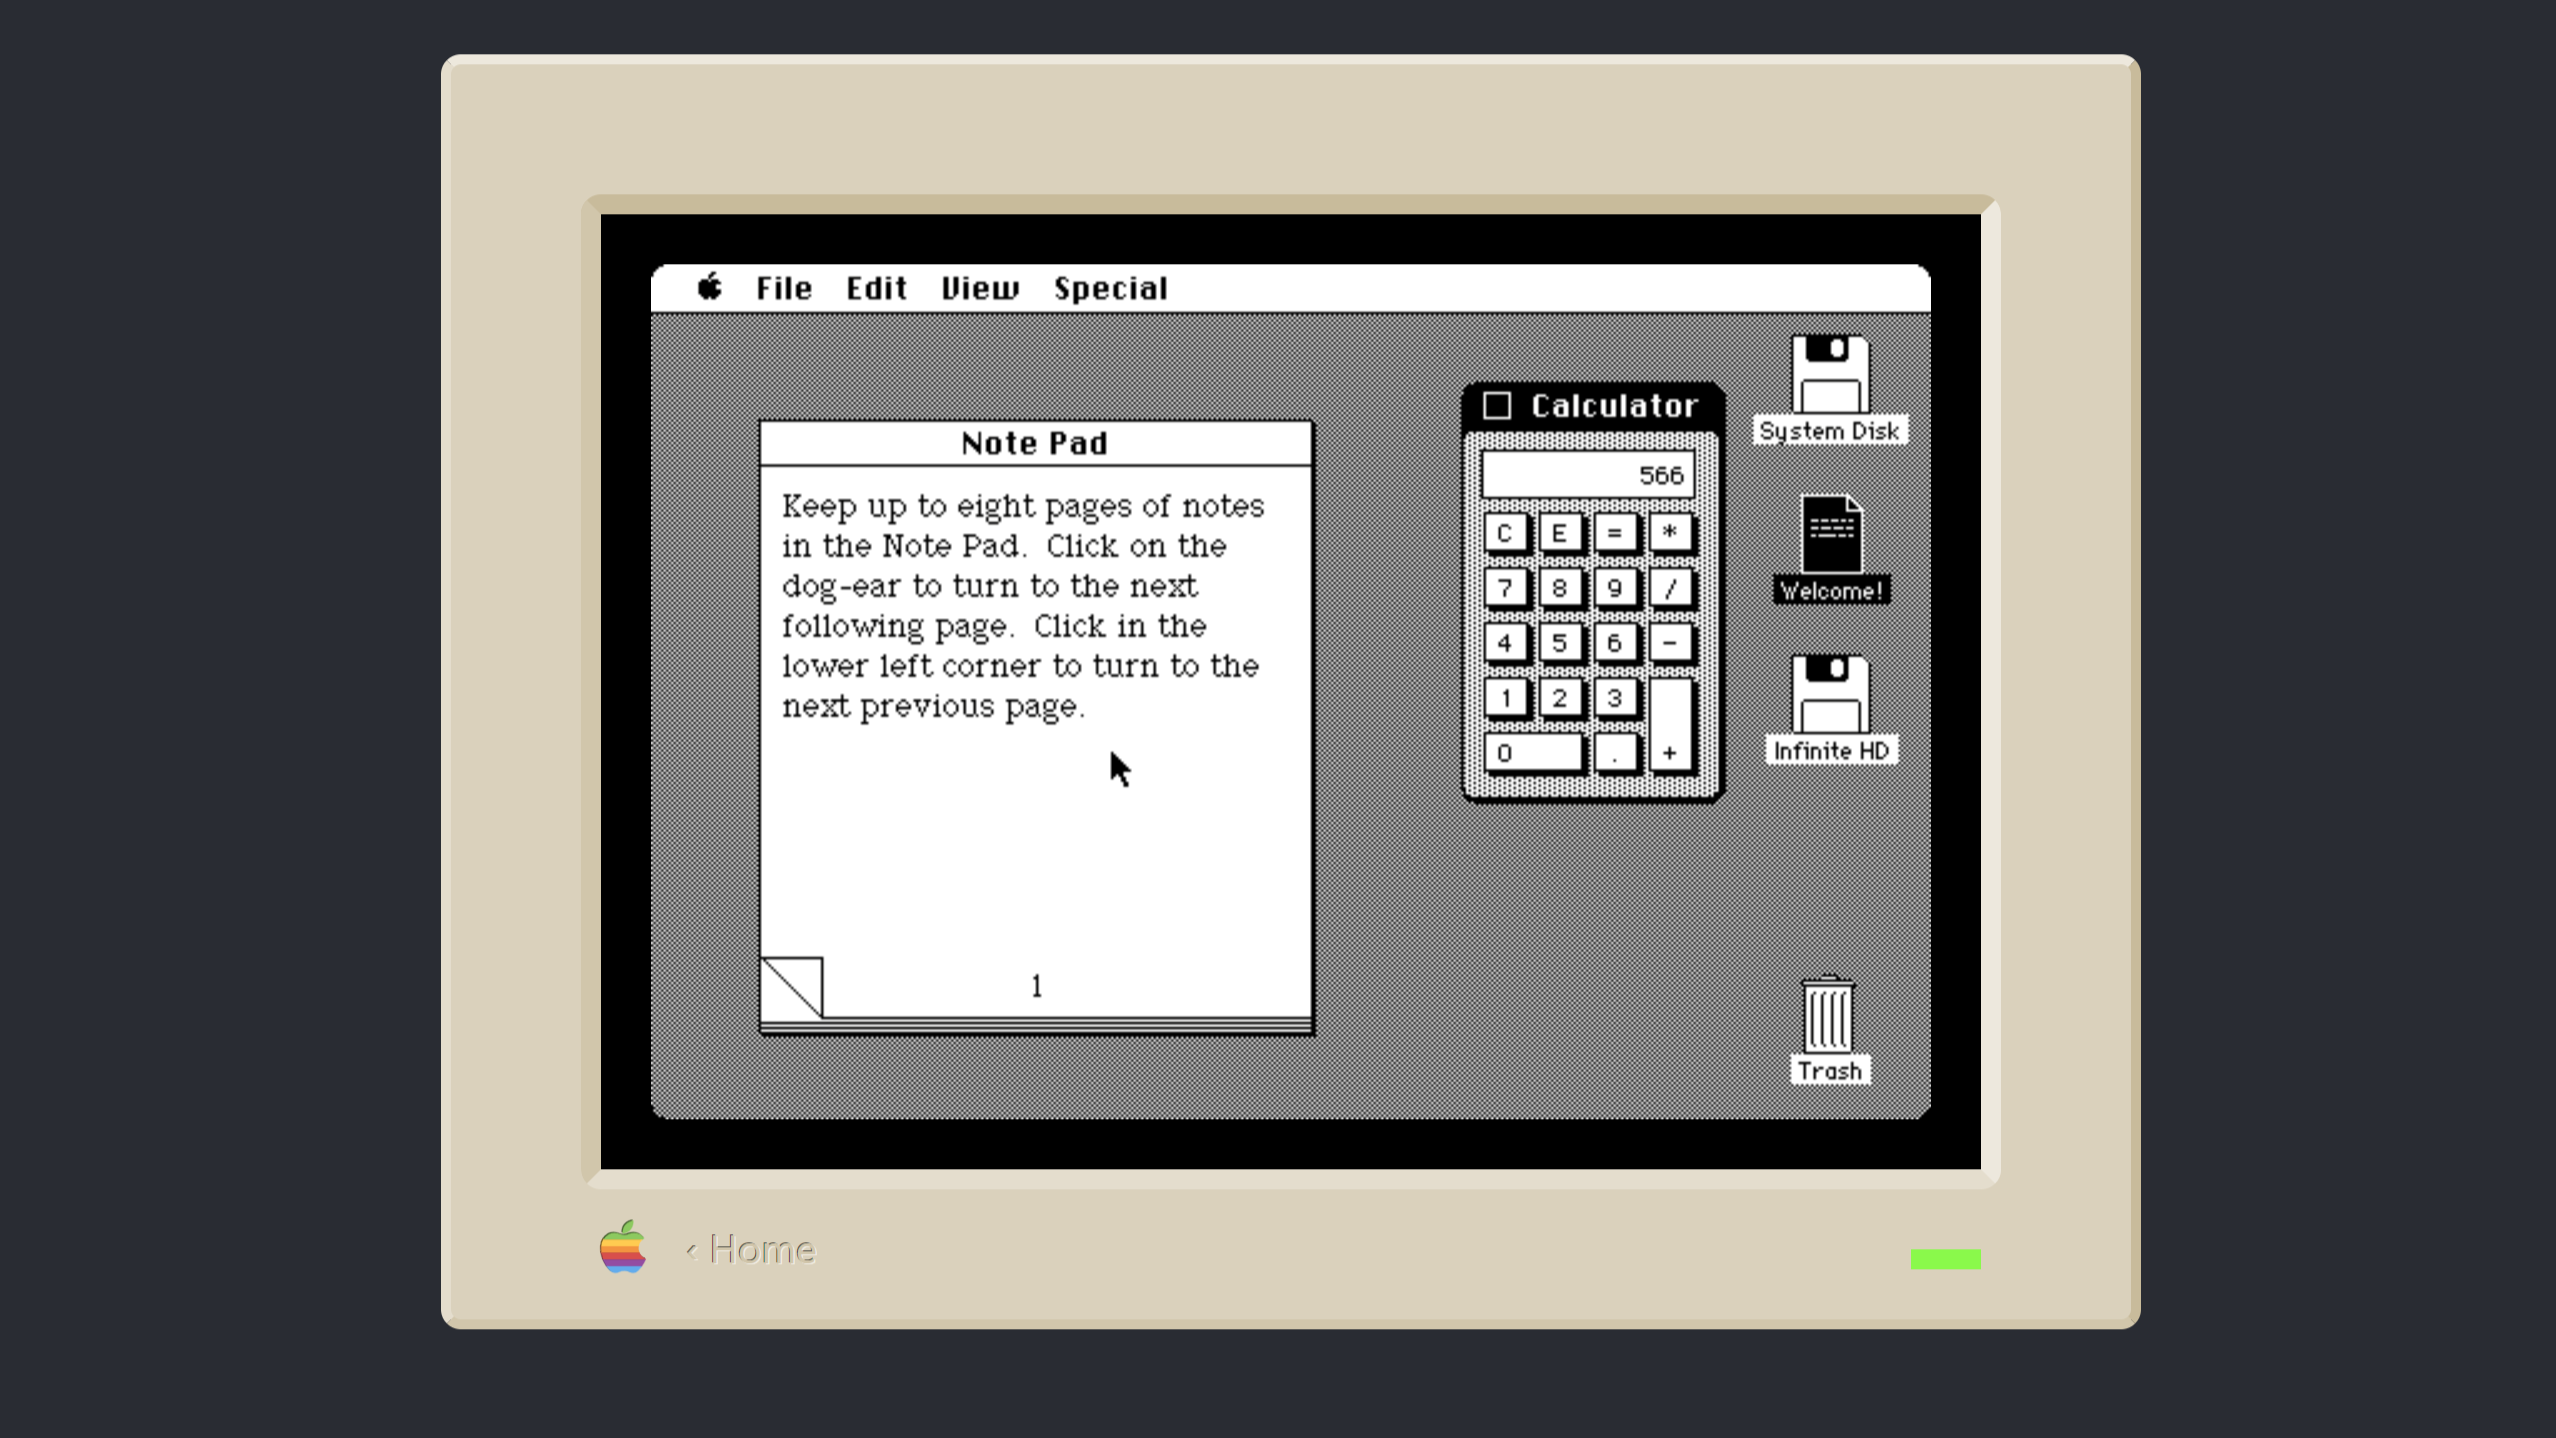 An old version of macOS running in a modern browser.